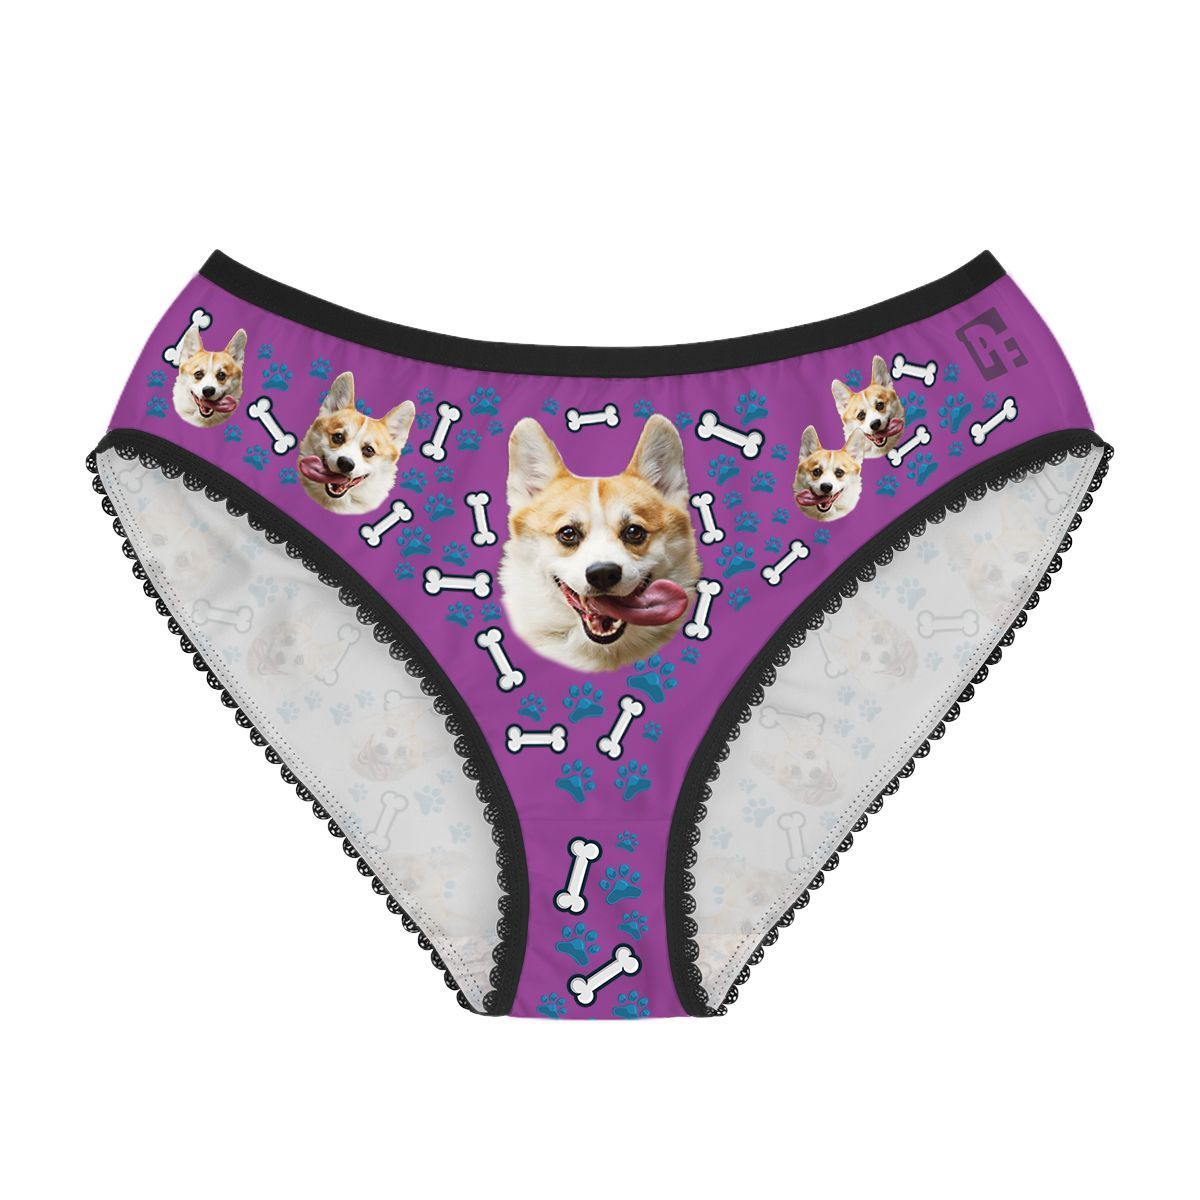 Red Dog women's underwear briefs personalized with photo printed on them